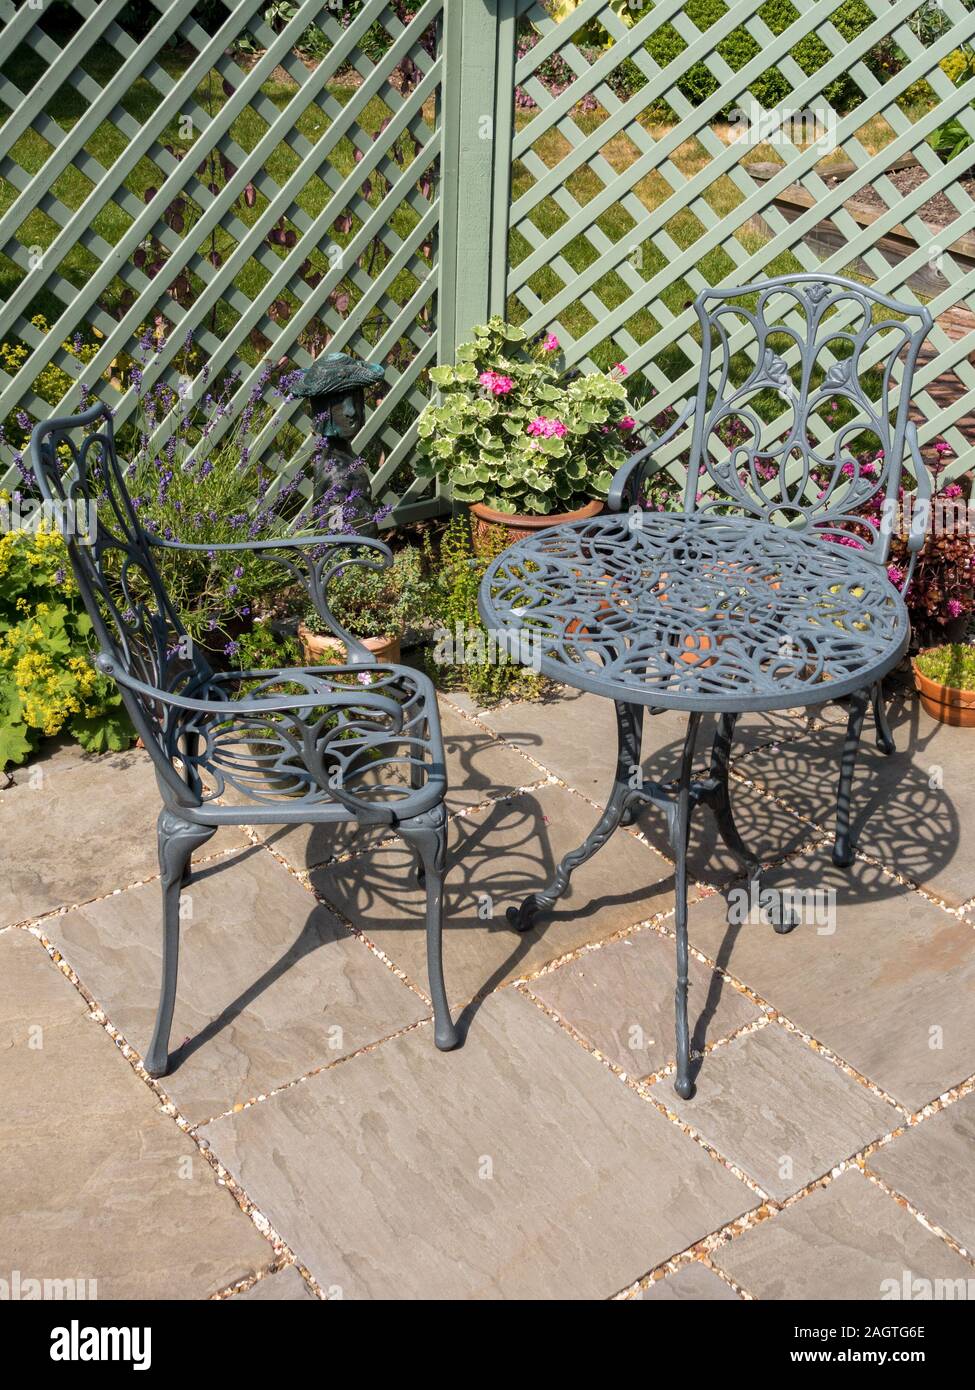 Metal table and chairs on small patio with green trellis, potted plants and natural stone slabs in English cottage garden in Summer. Stock Photo